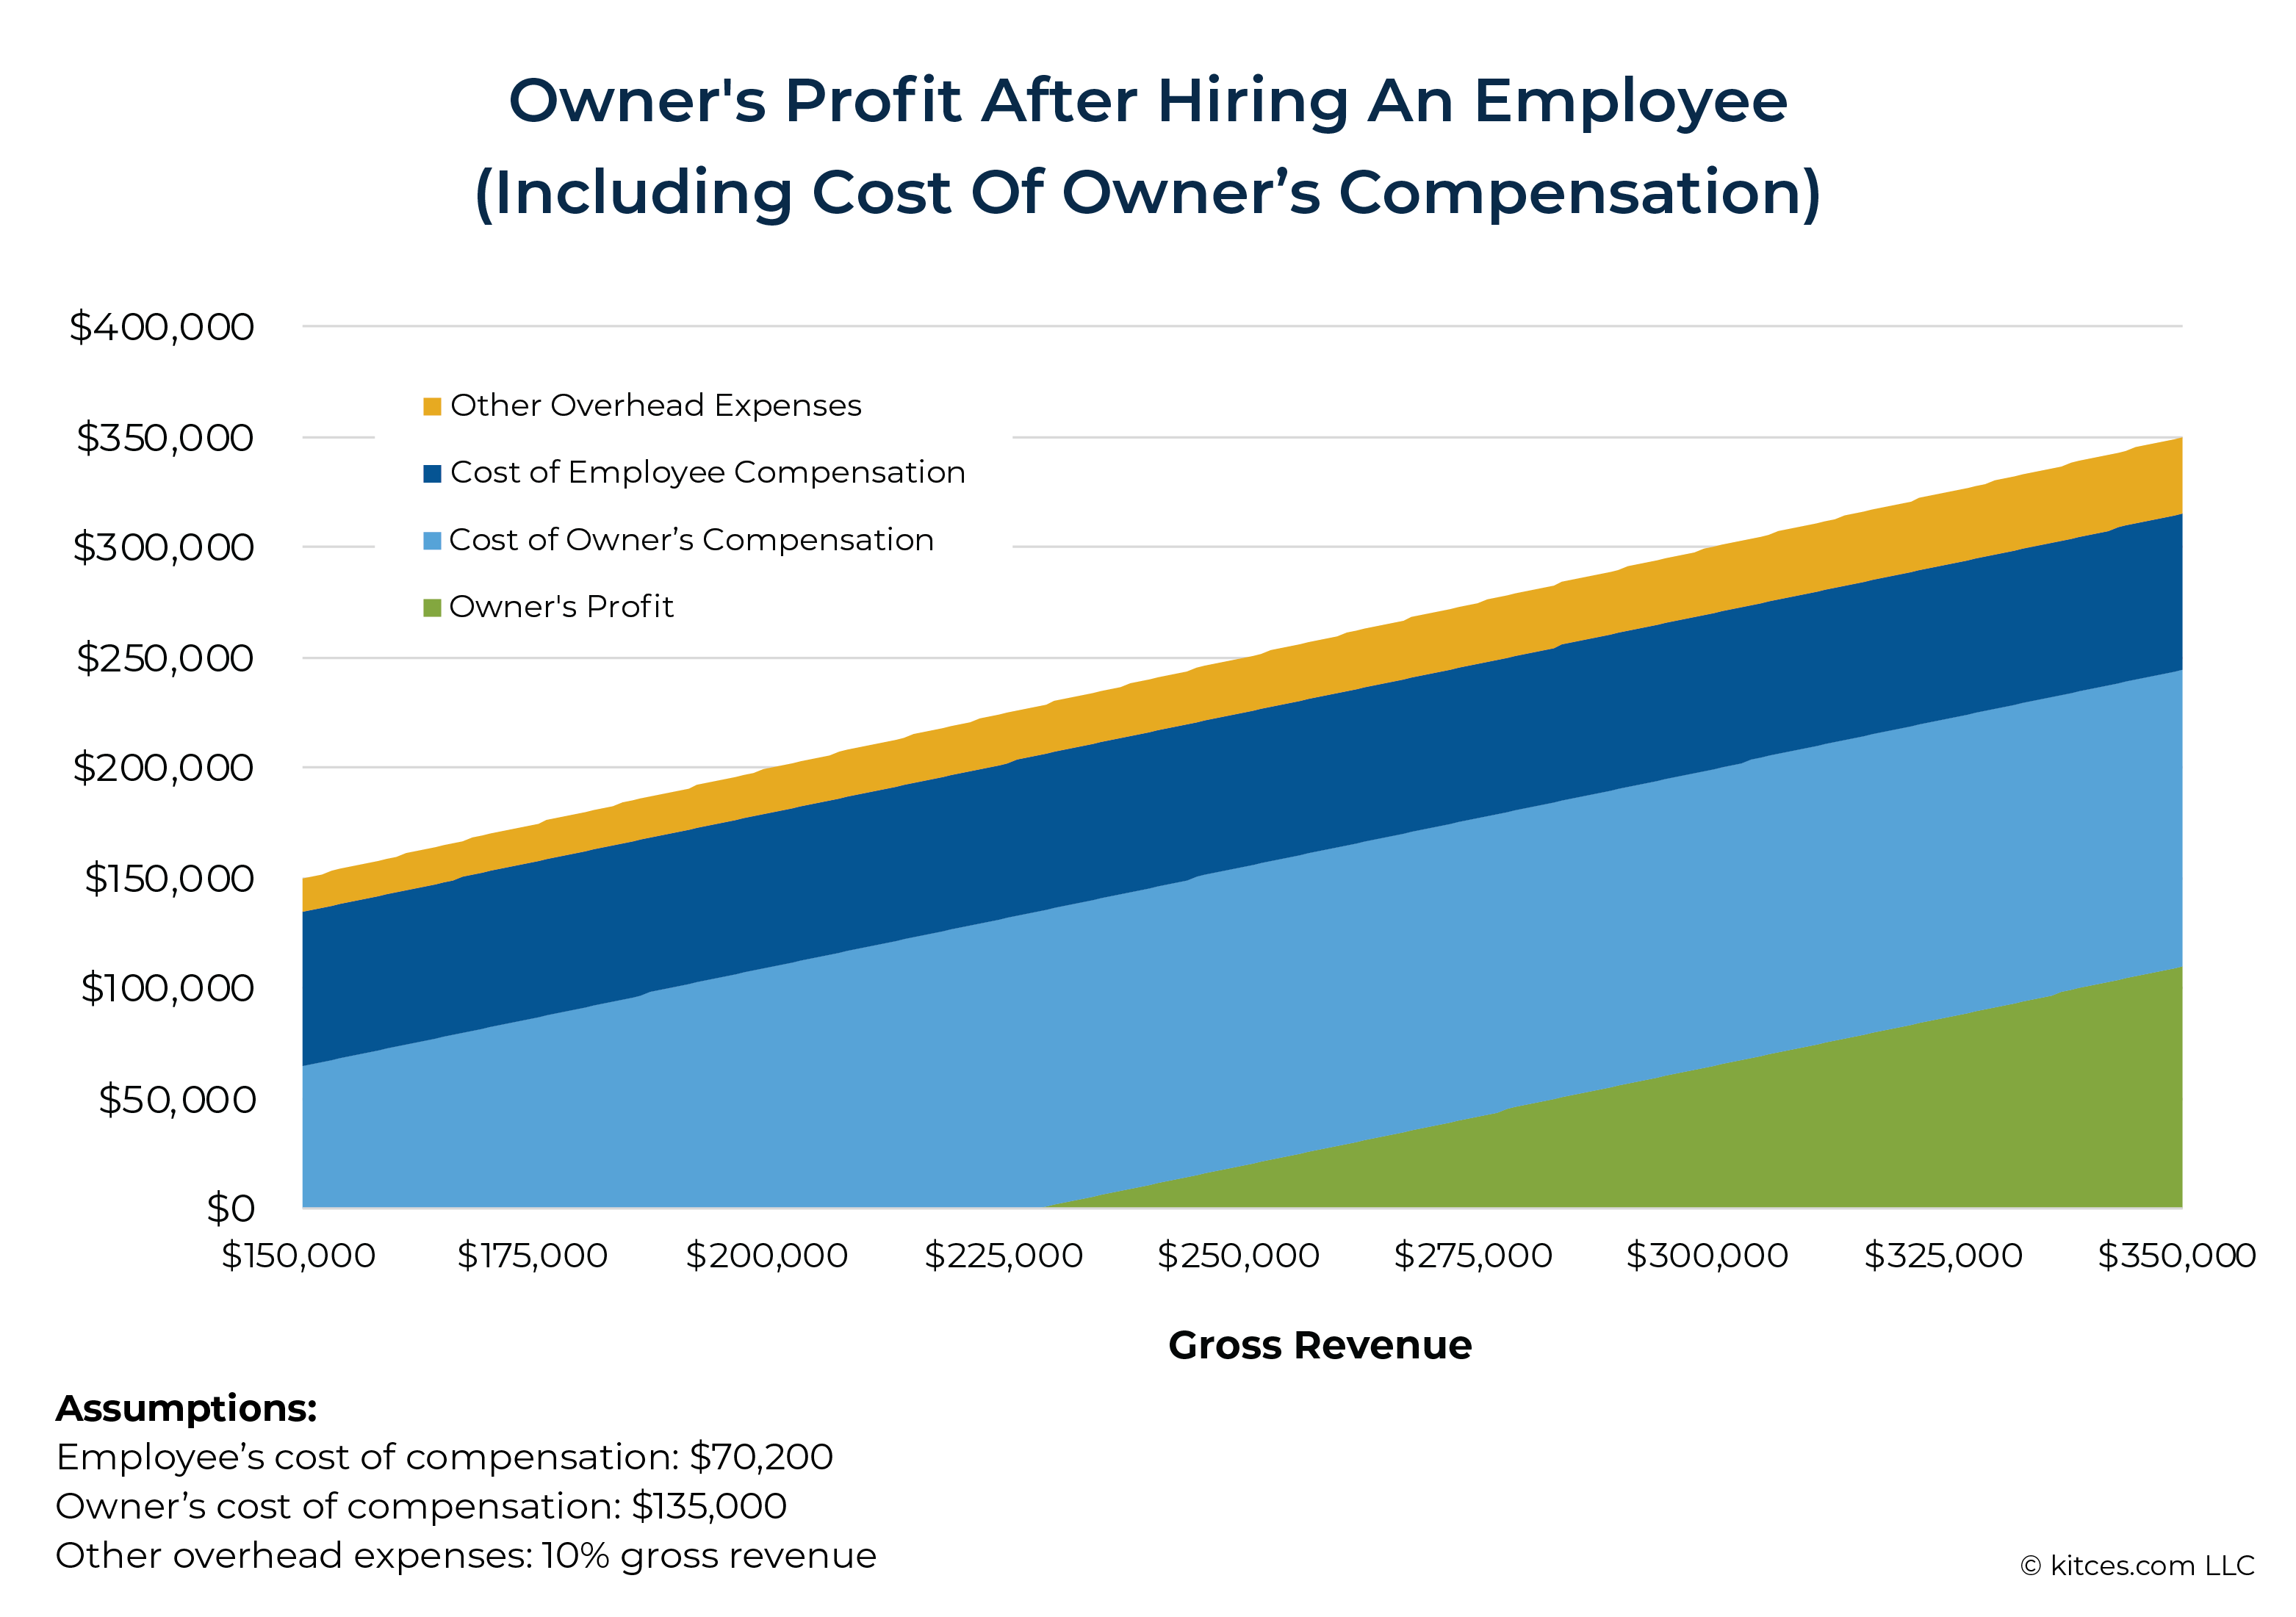 Owners Profit After Hiring An Employee Including Cost Of Owners Compensation